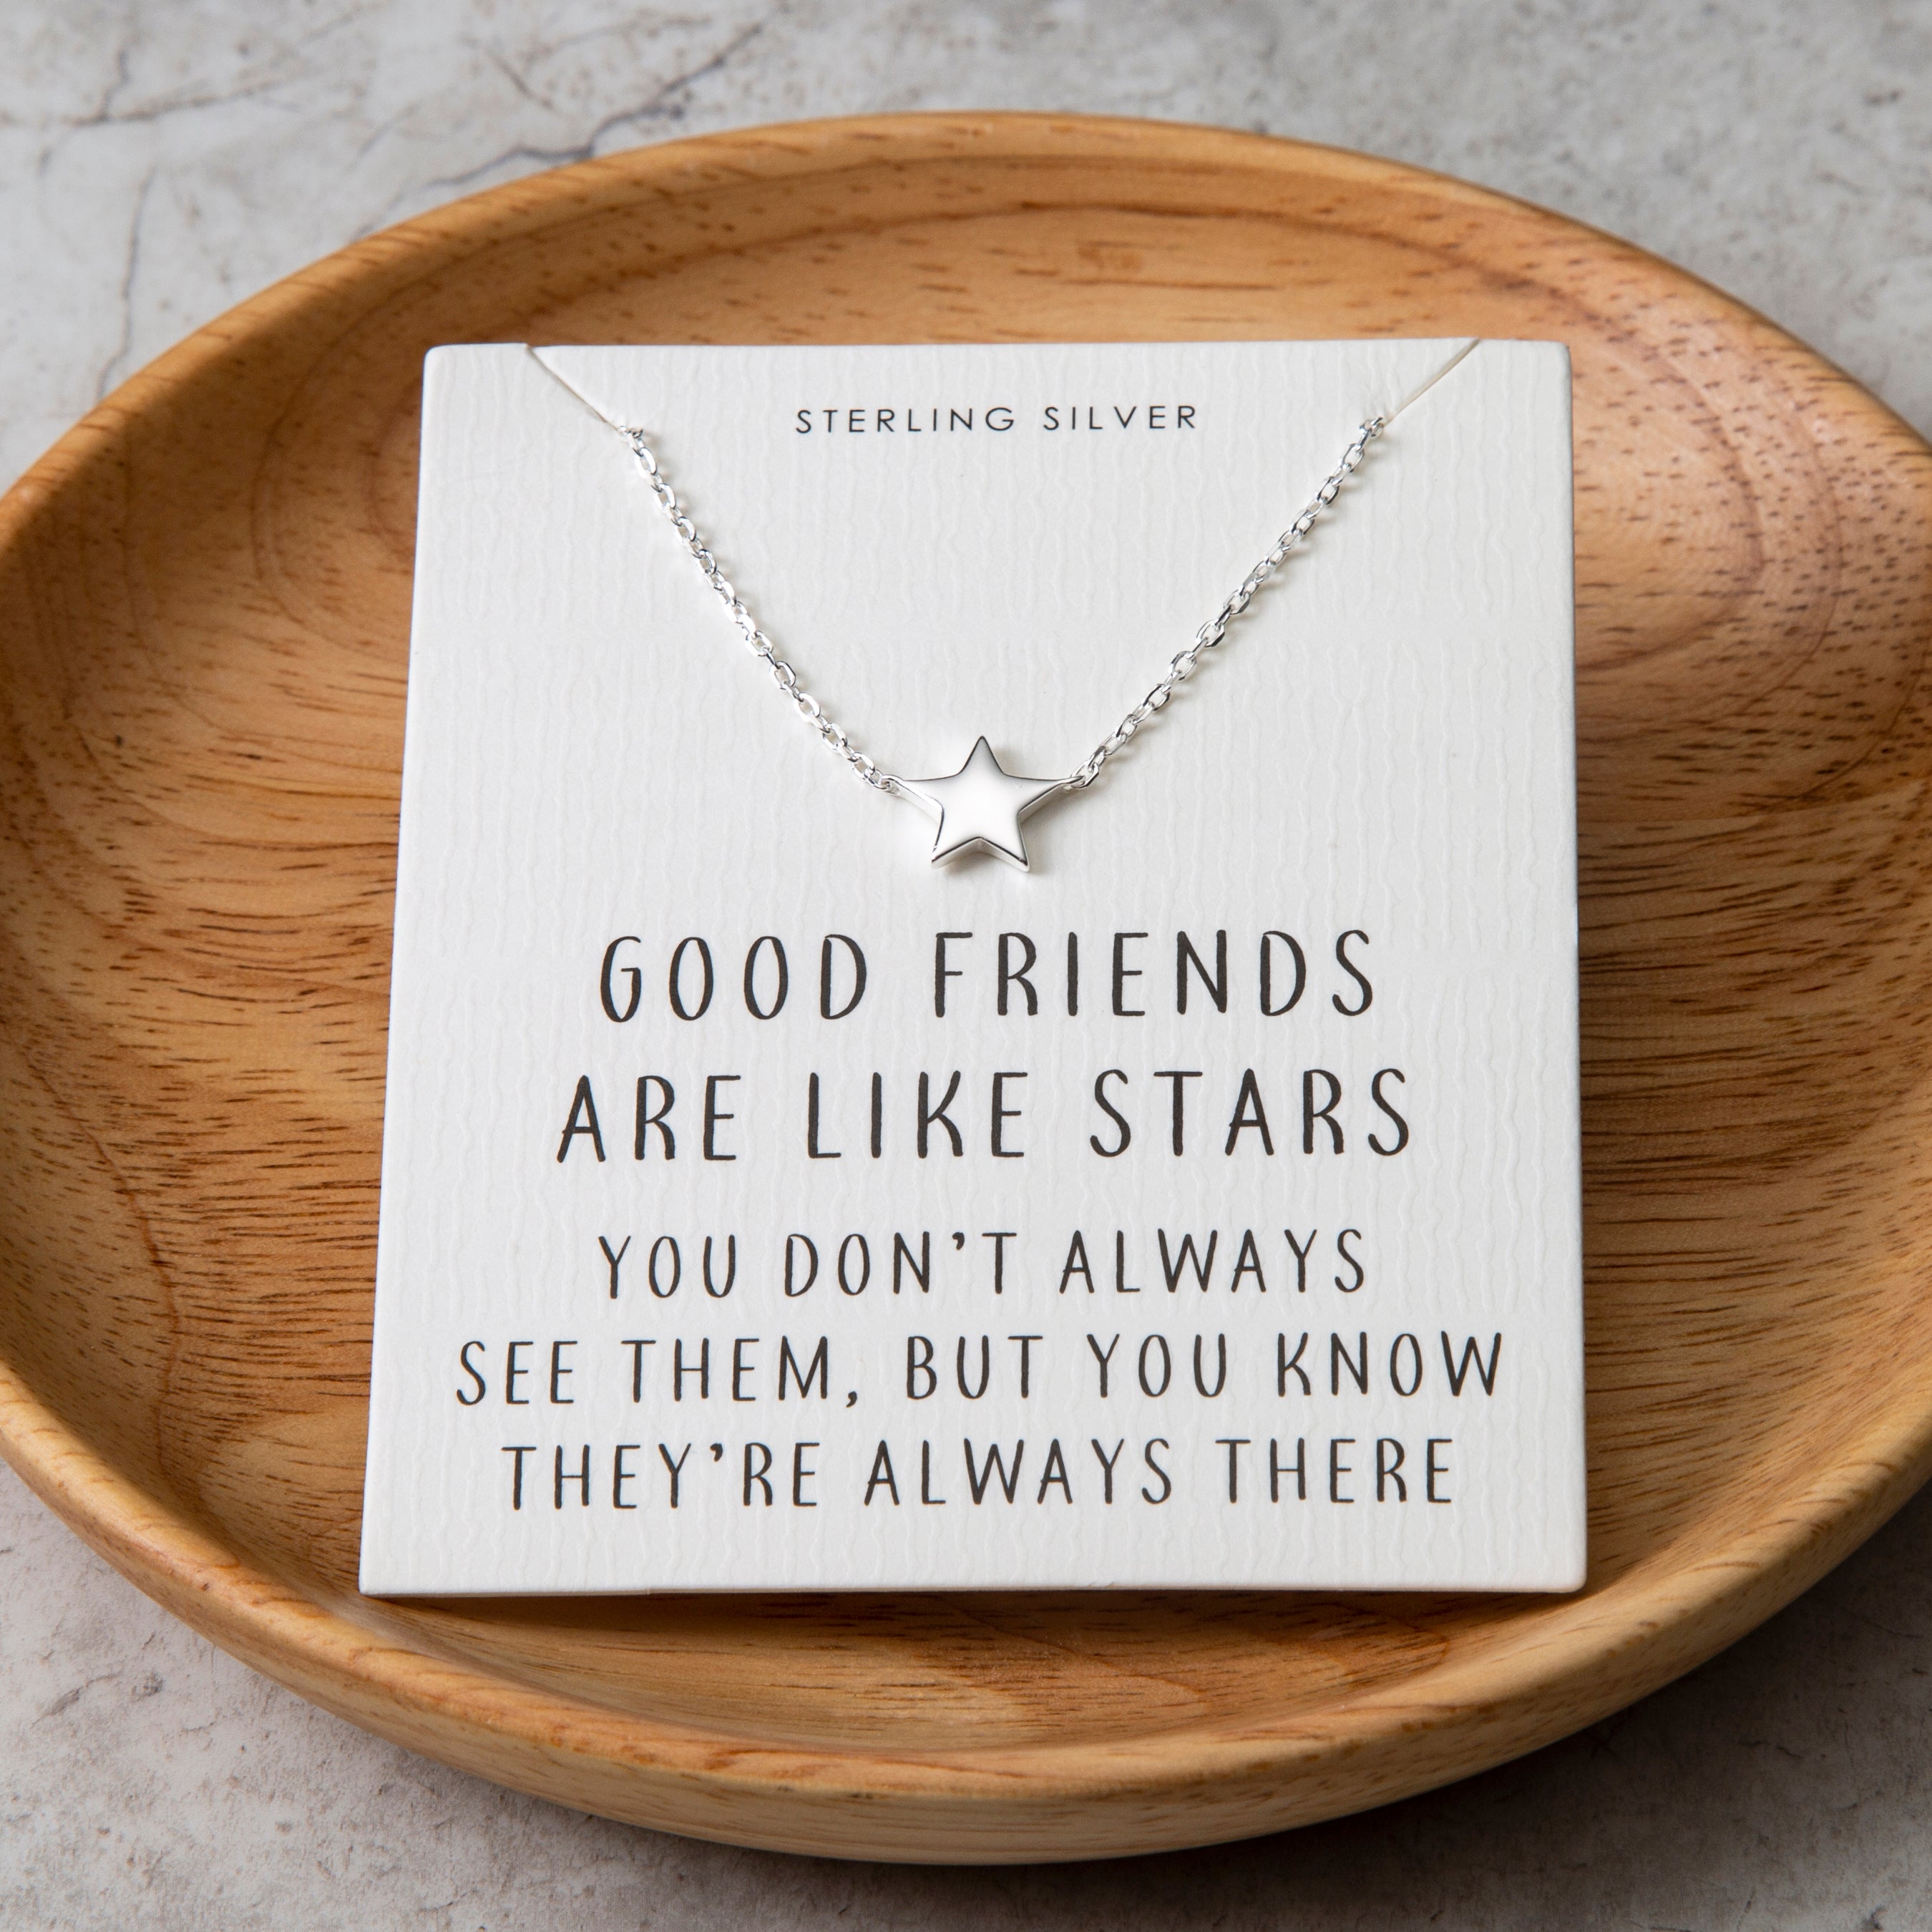 Sterling Silver Friendship Quote Star Necklace